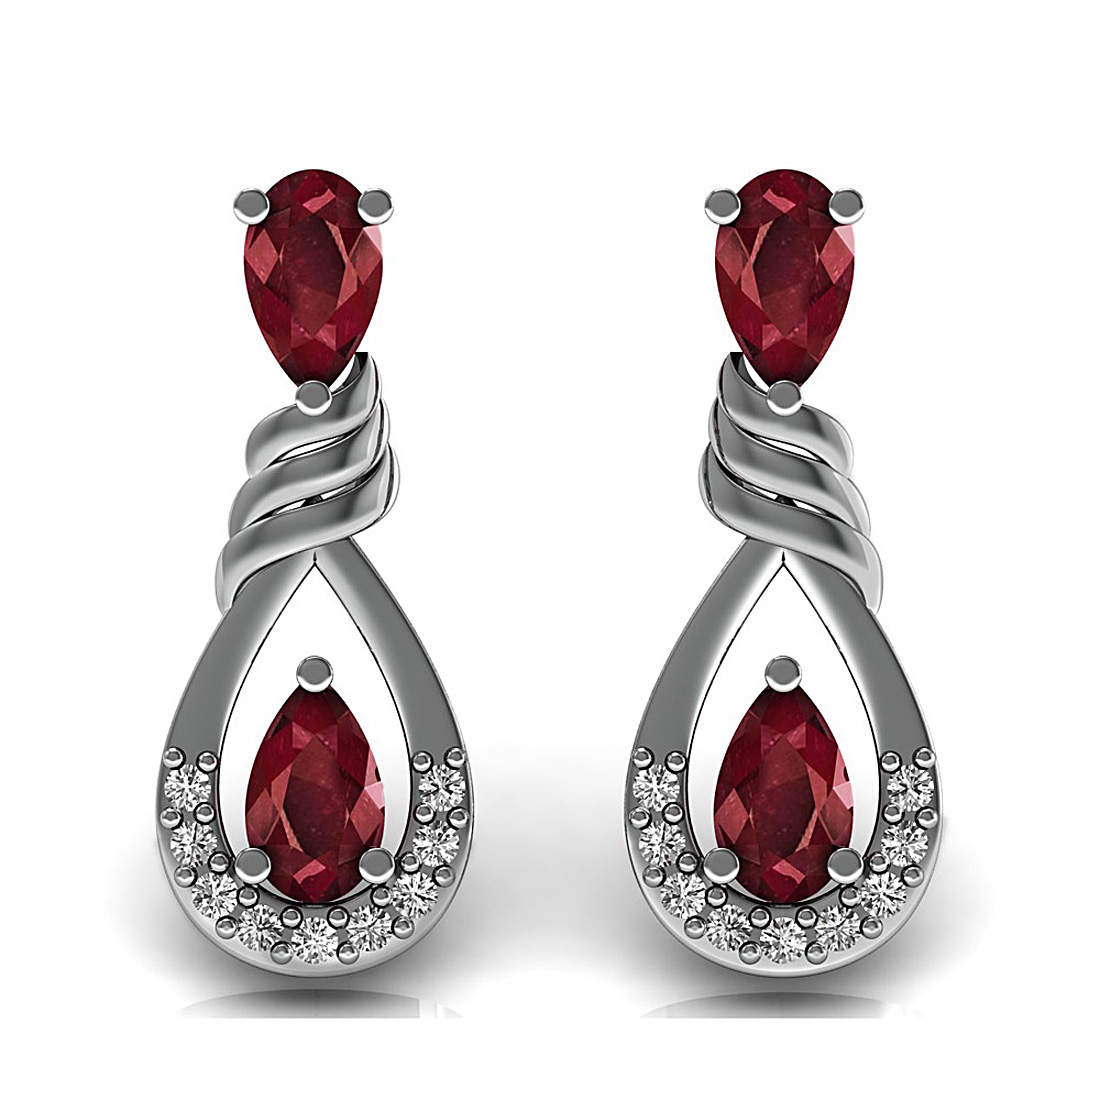 Natural ruby gemstone stud earrings made in 18k solid white gold adorned with genuine diamond.